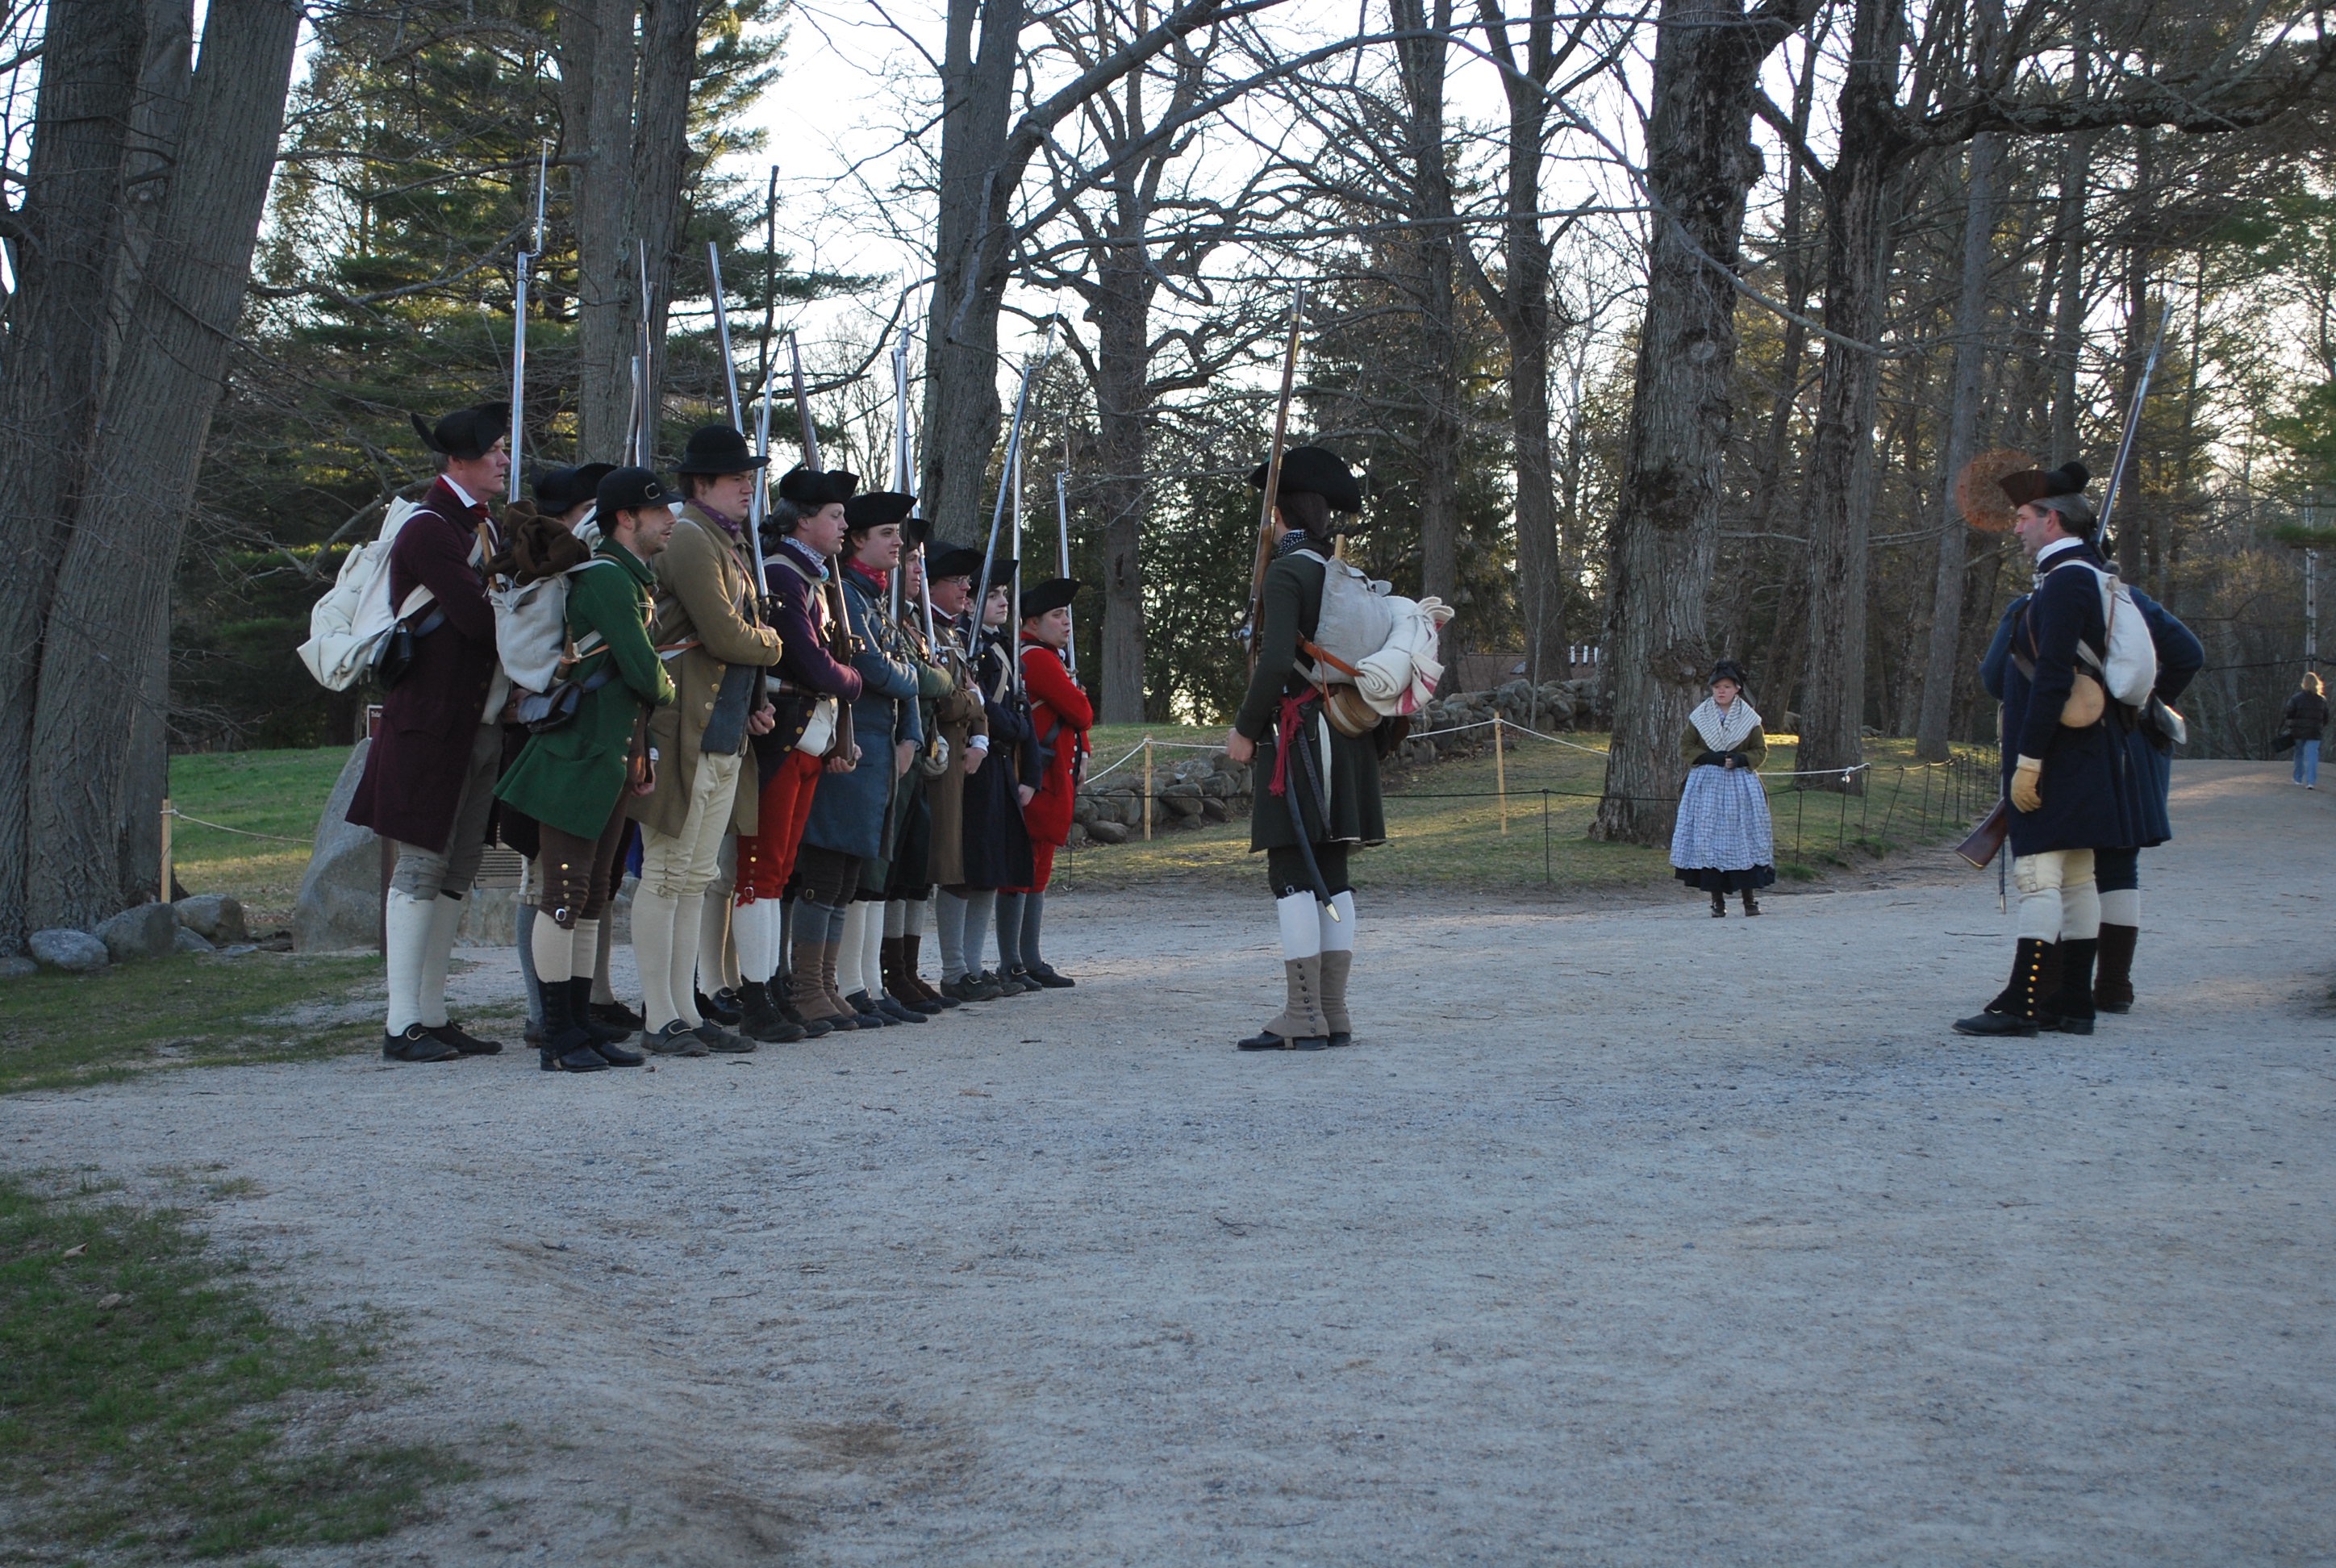 Patriot's Weekend at Minute Man National Historical Park, featuring Captain Brown's Company.